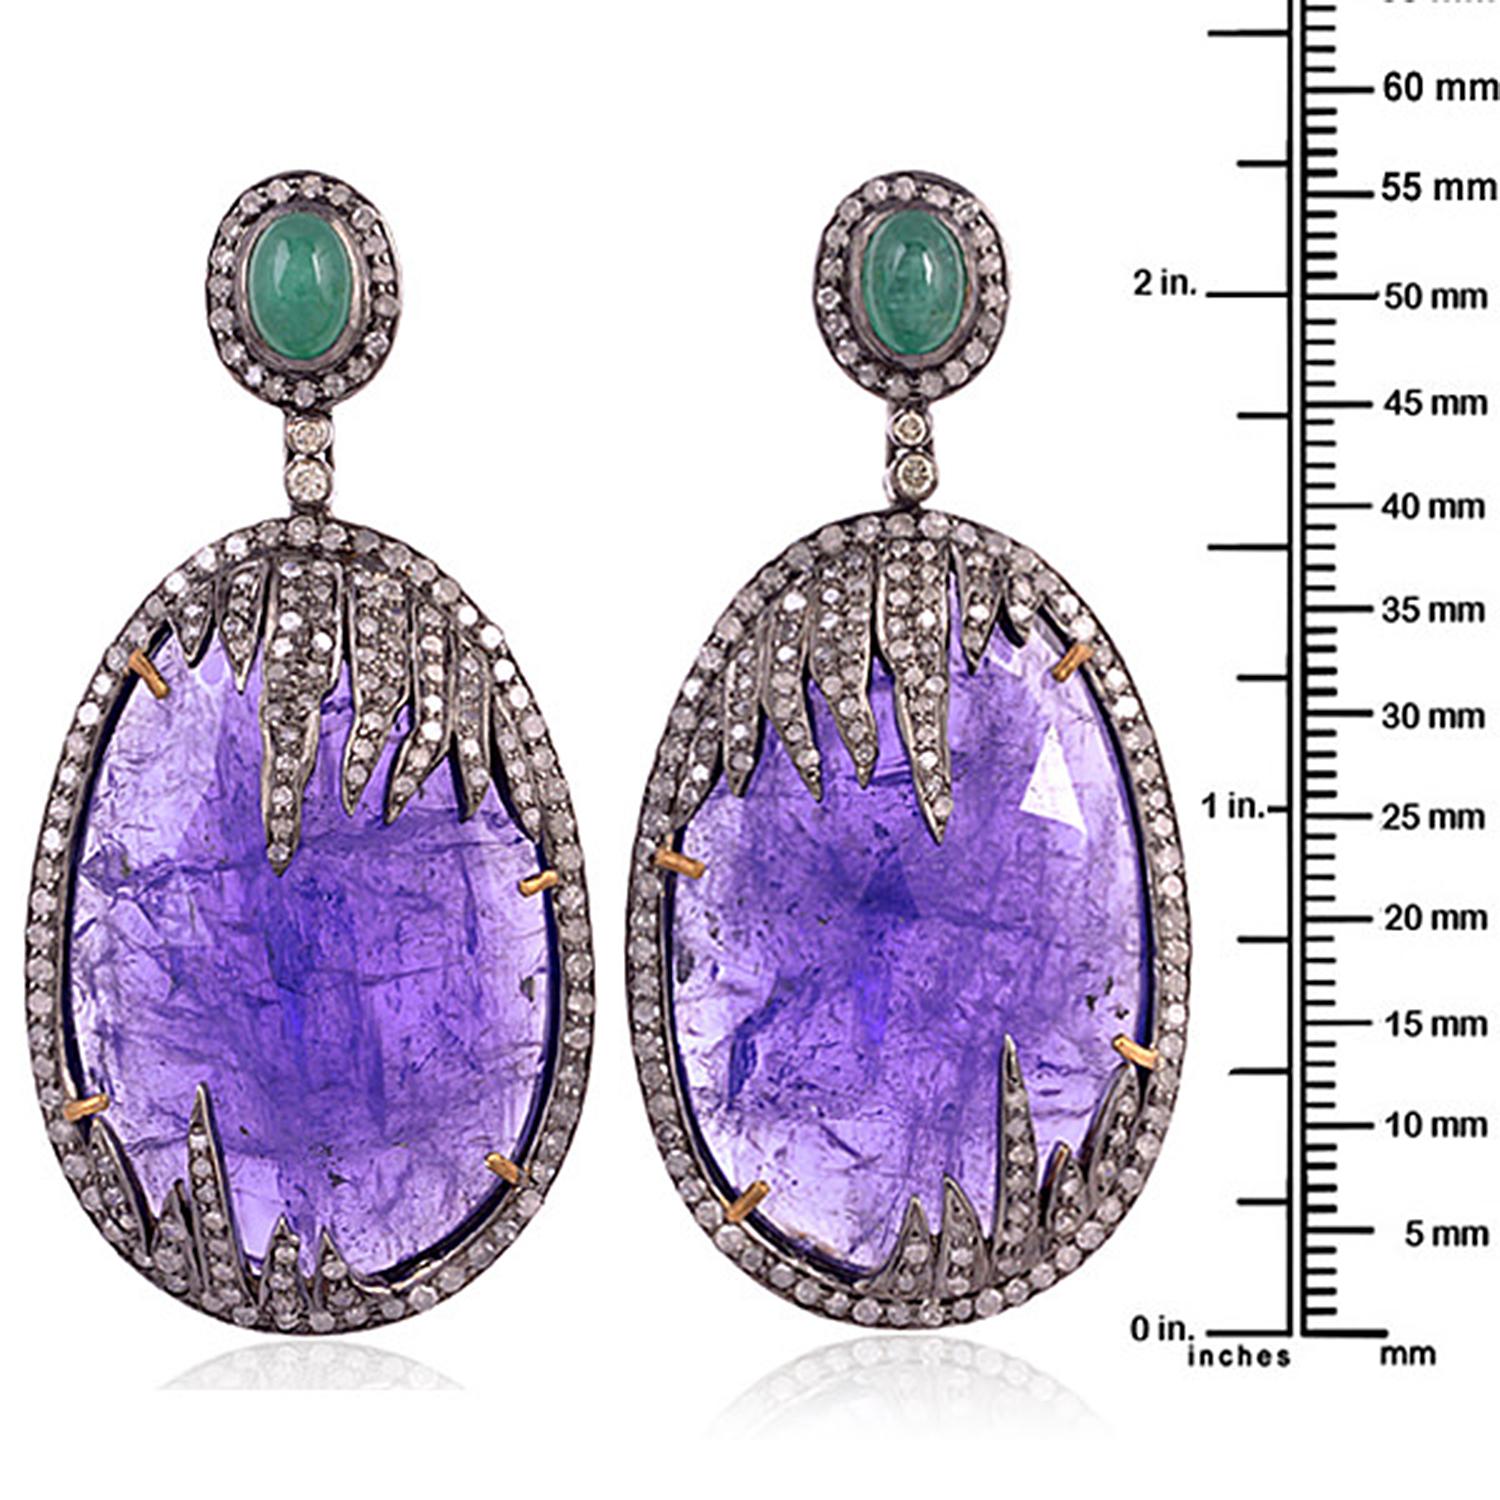 Contemporary 79.7ct Tanzanite Dangle Earrings With Emerald & Diamonds Made in 18k White Gold For Sale